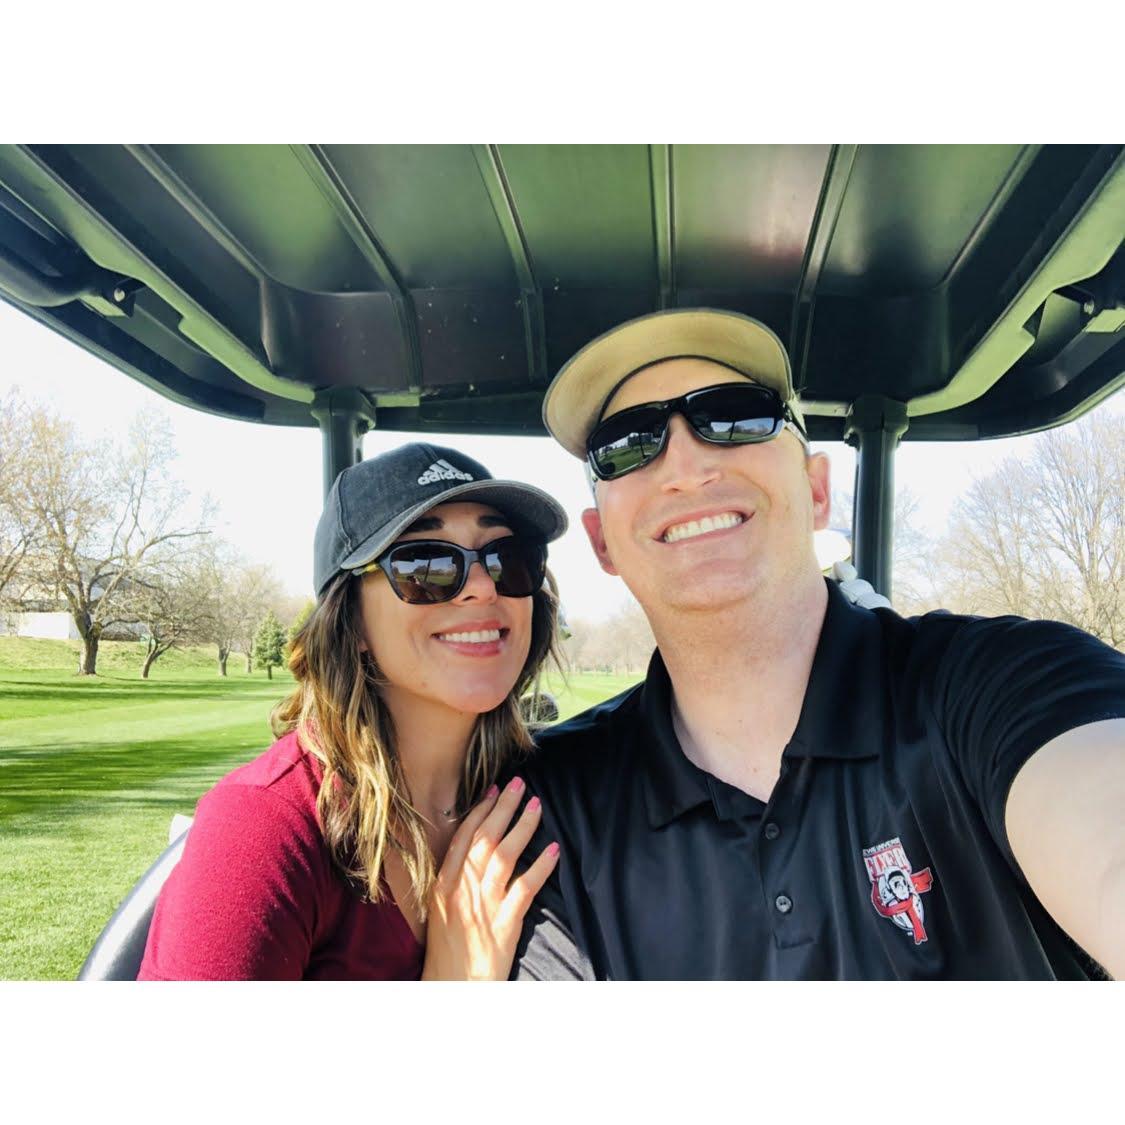 Where: Miracle Hill Golf Course in Omaha, NE
When: April 4, 2021
Why: My first round of golf in Nebraska while visiting Andy